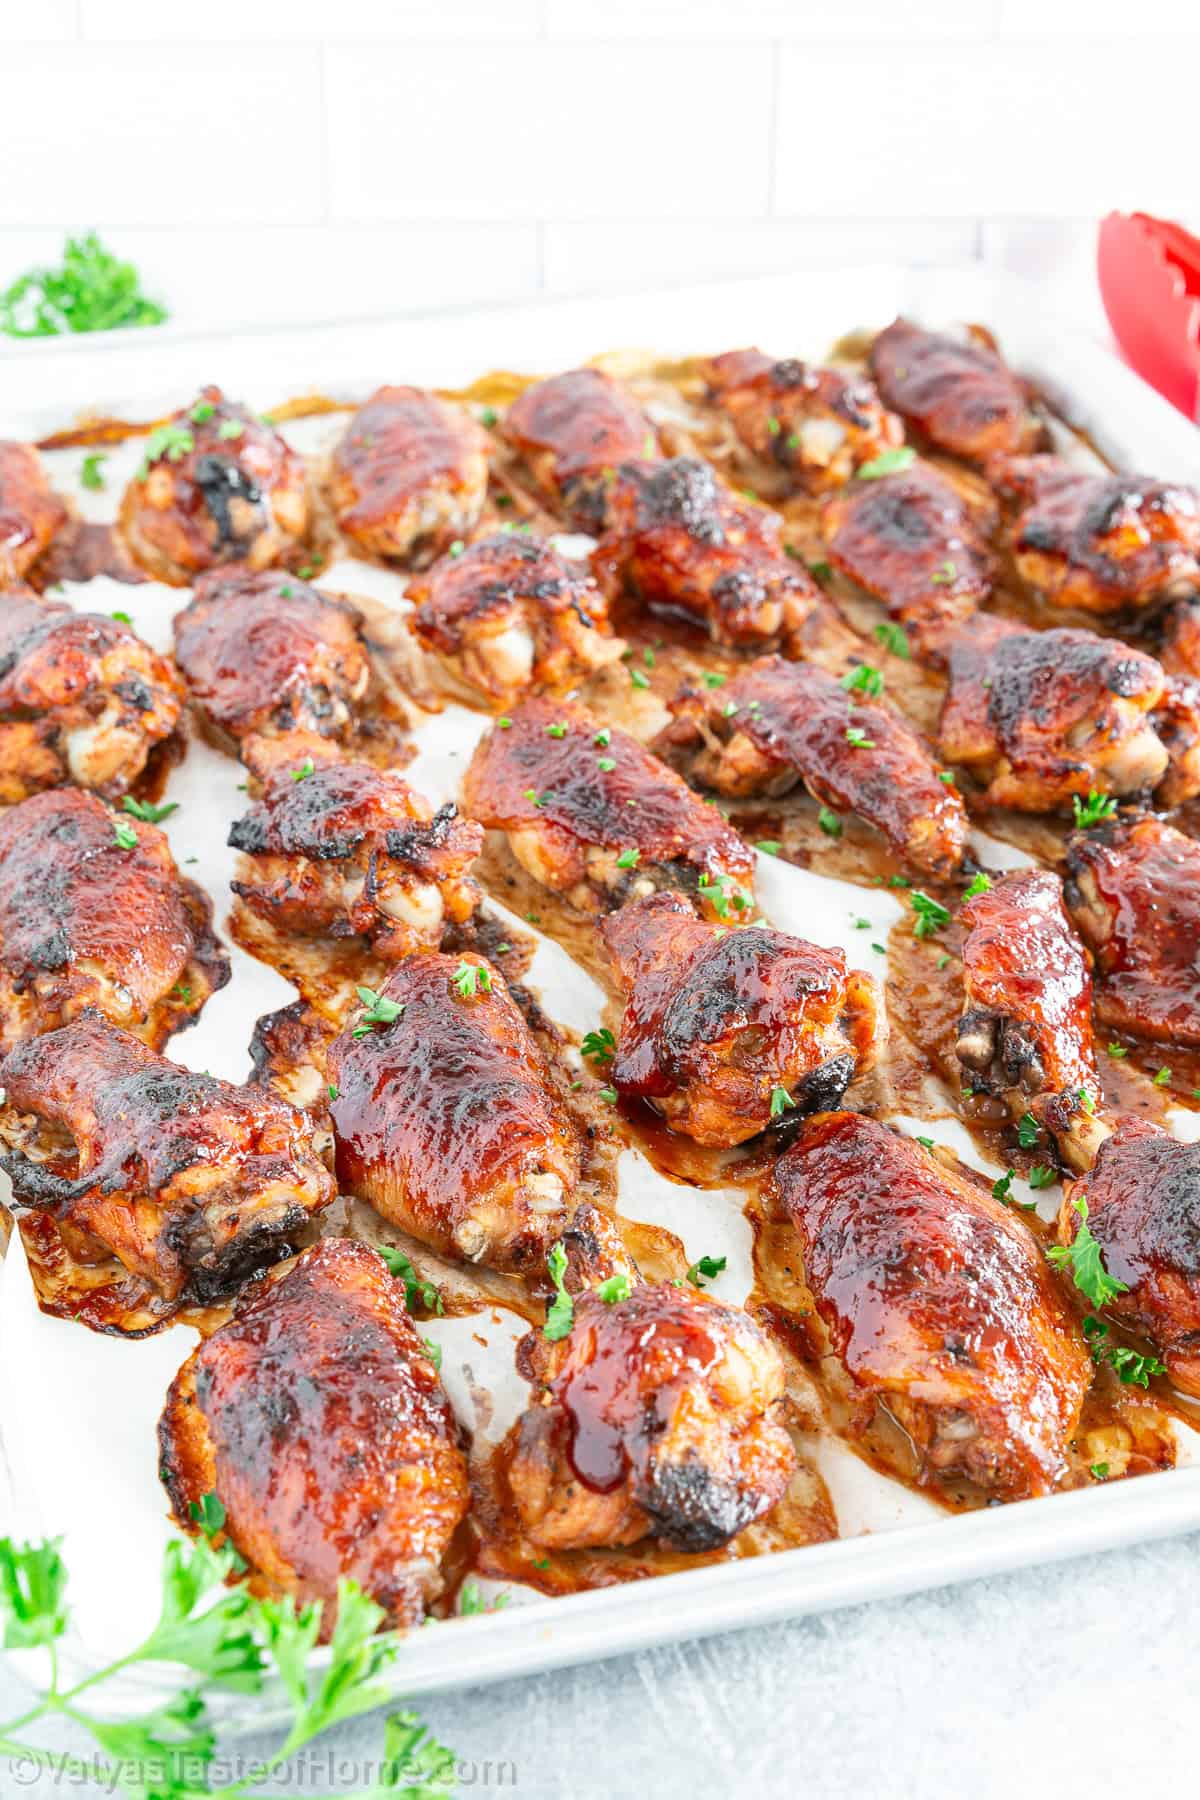 his BBQ chicken wings recipe is straightforward and uncomplicated. With just a few steps, you'll have a delicious meal ready in no time.